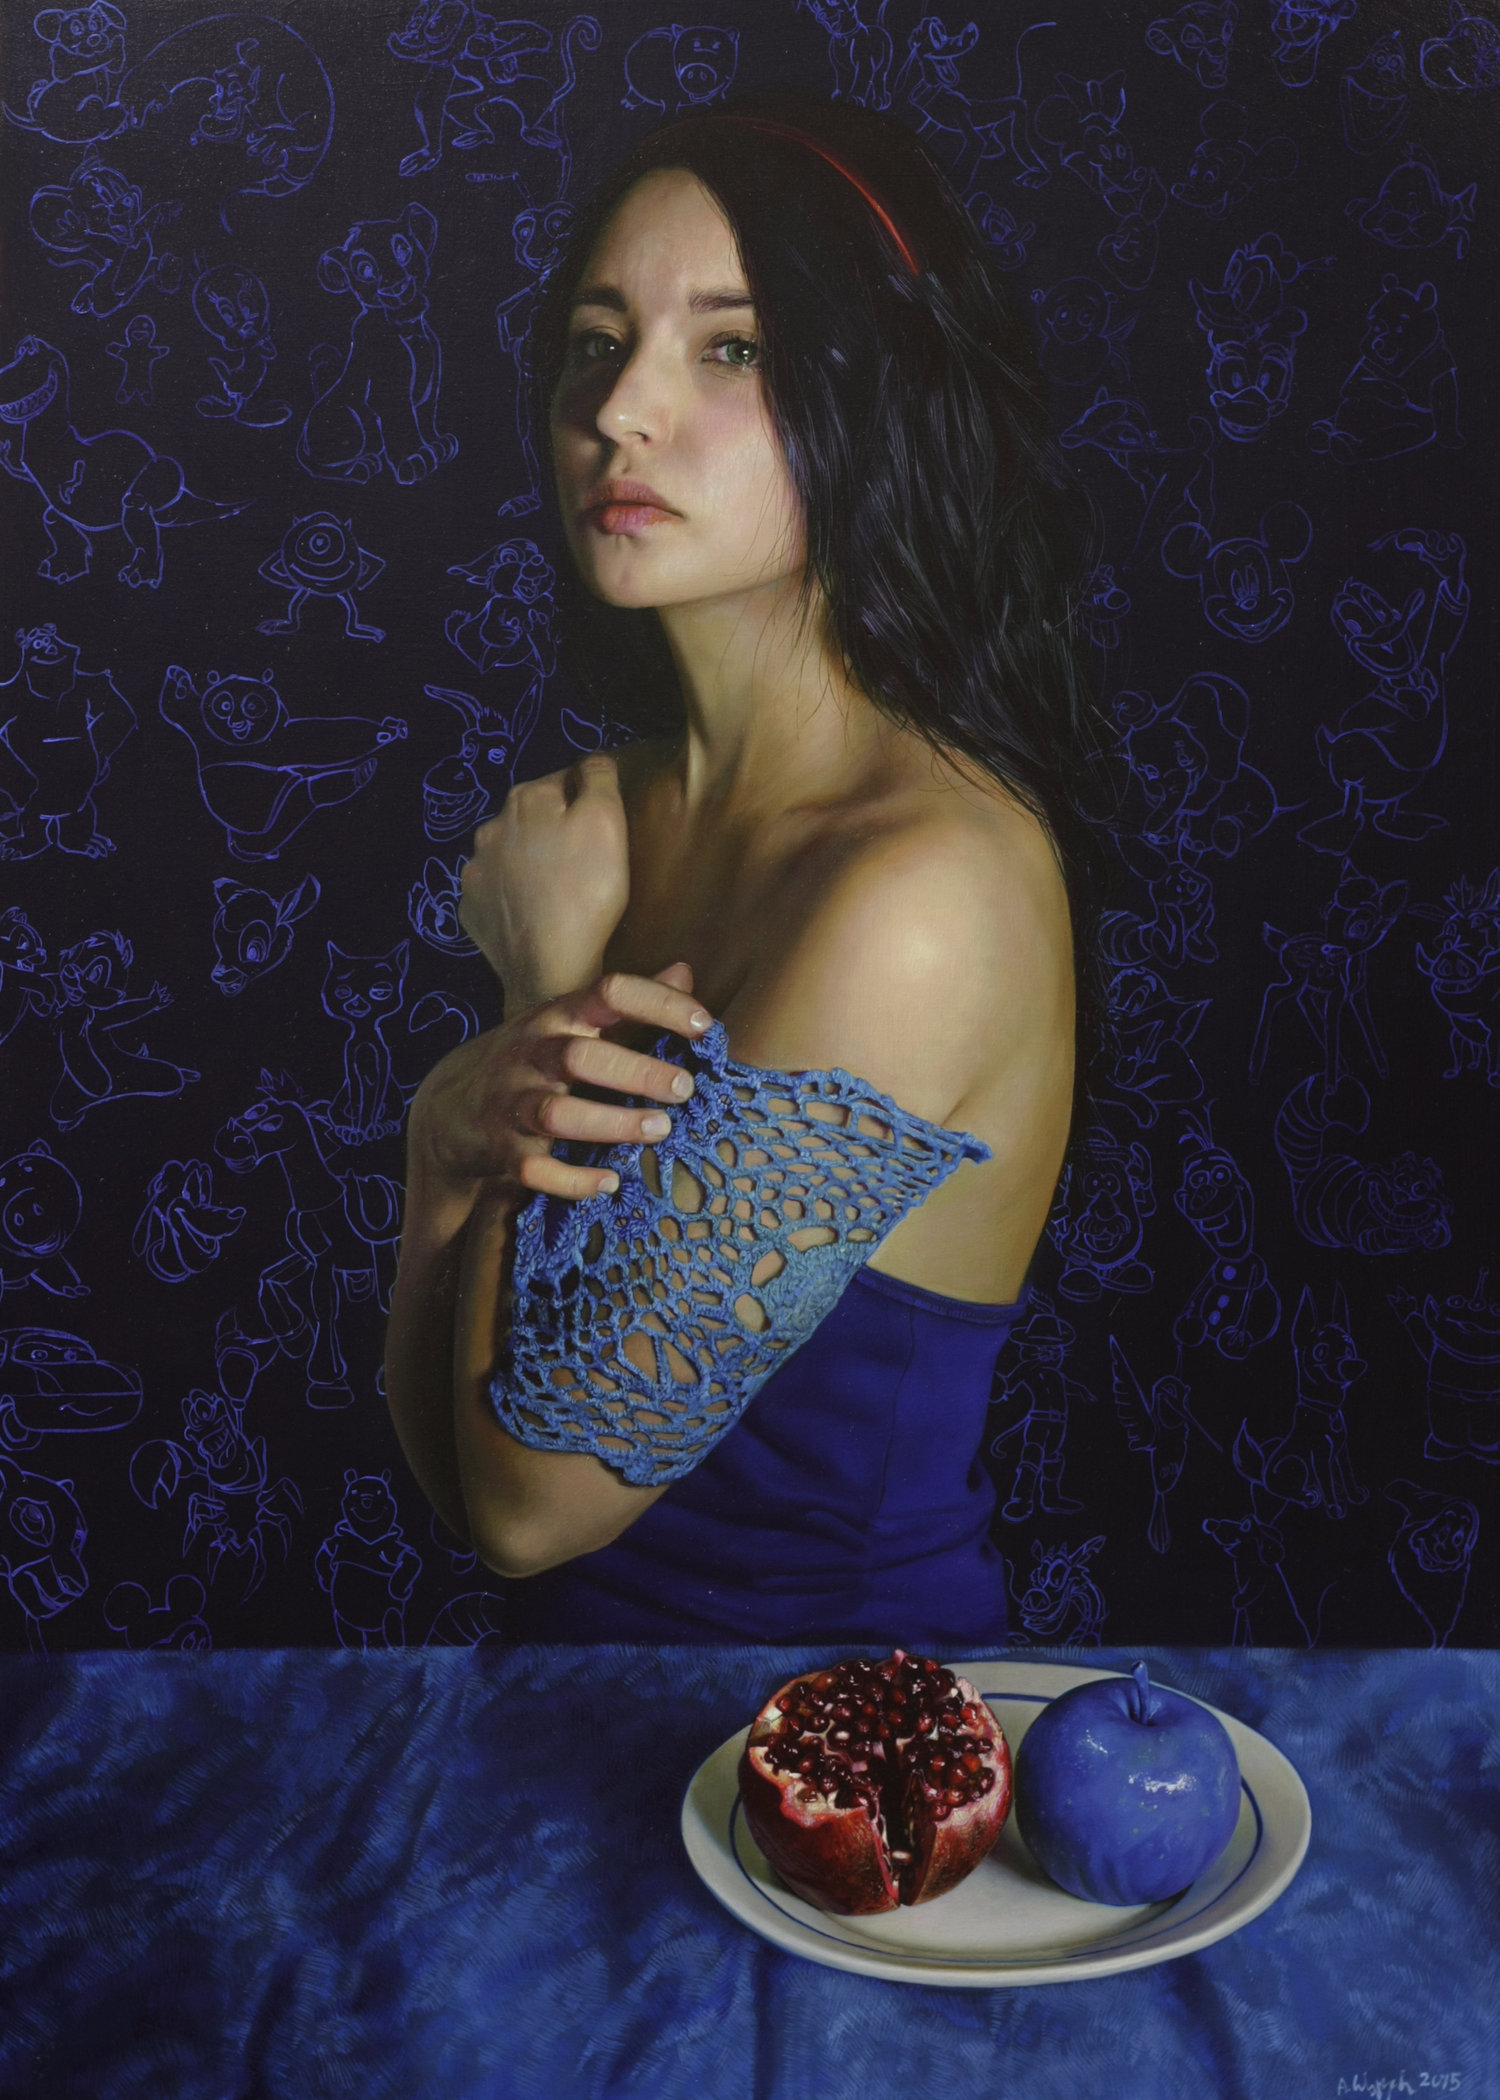 Anna Wypych  |  Blue  |  Oil on icon panel  |  27 ½ x 20 inches or 70 x 50 cm